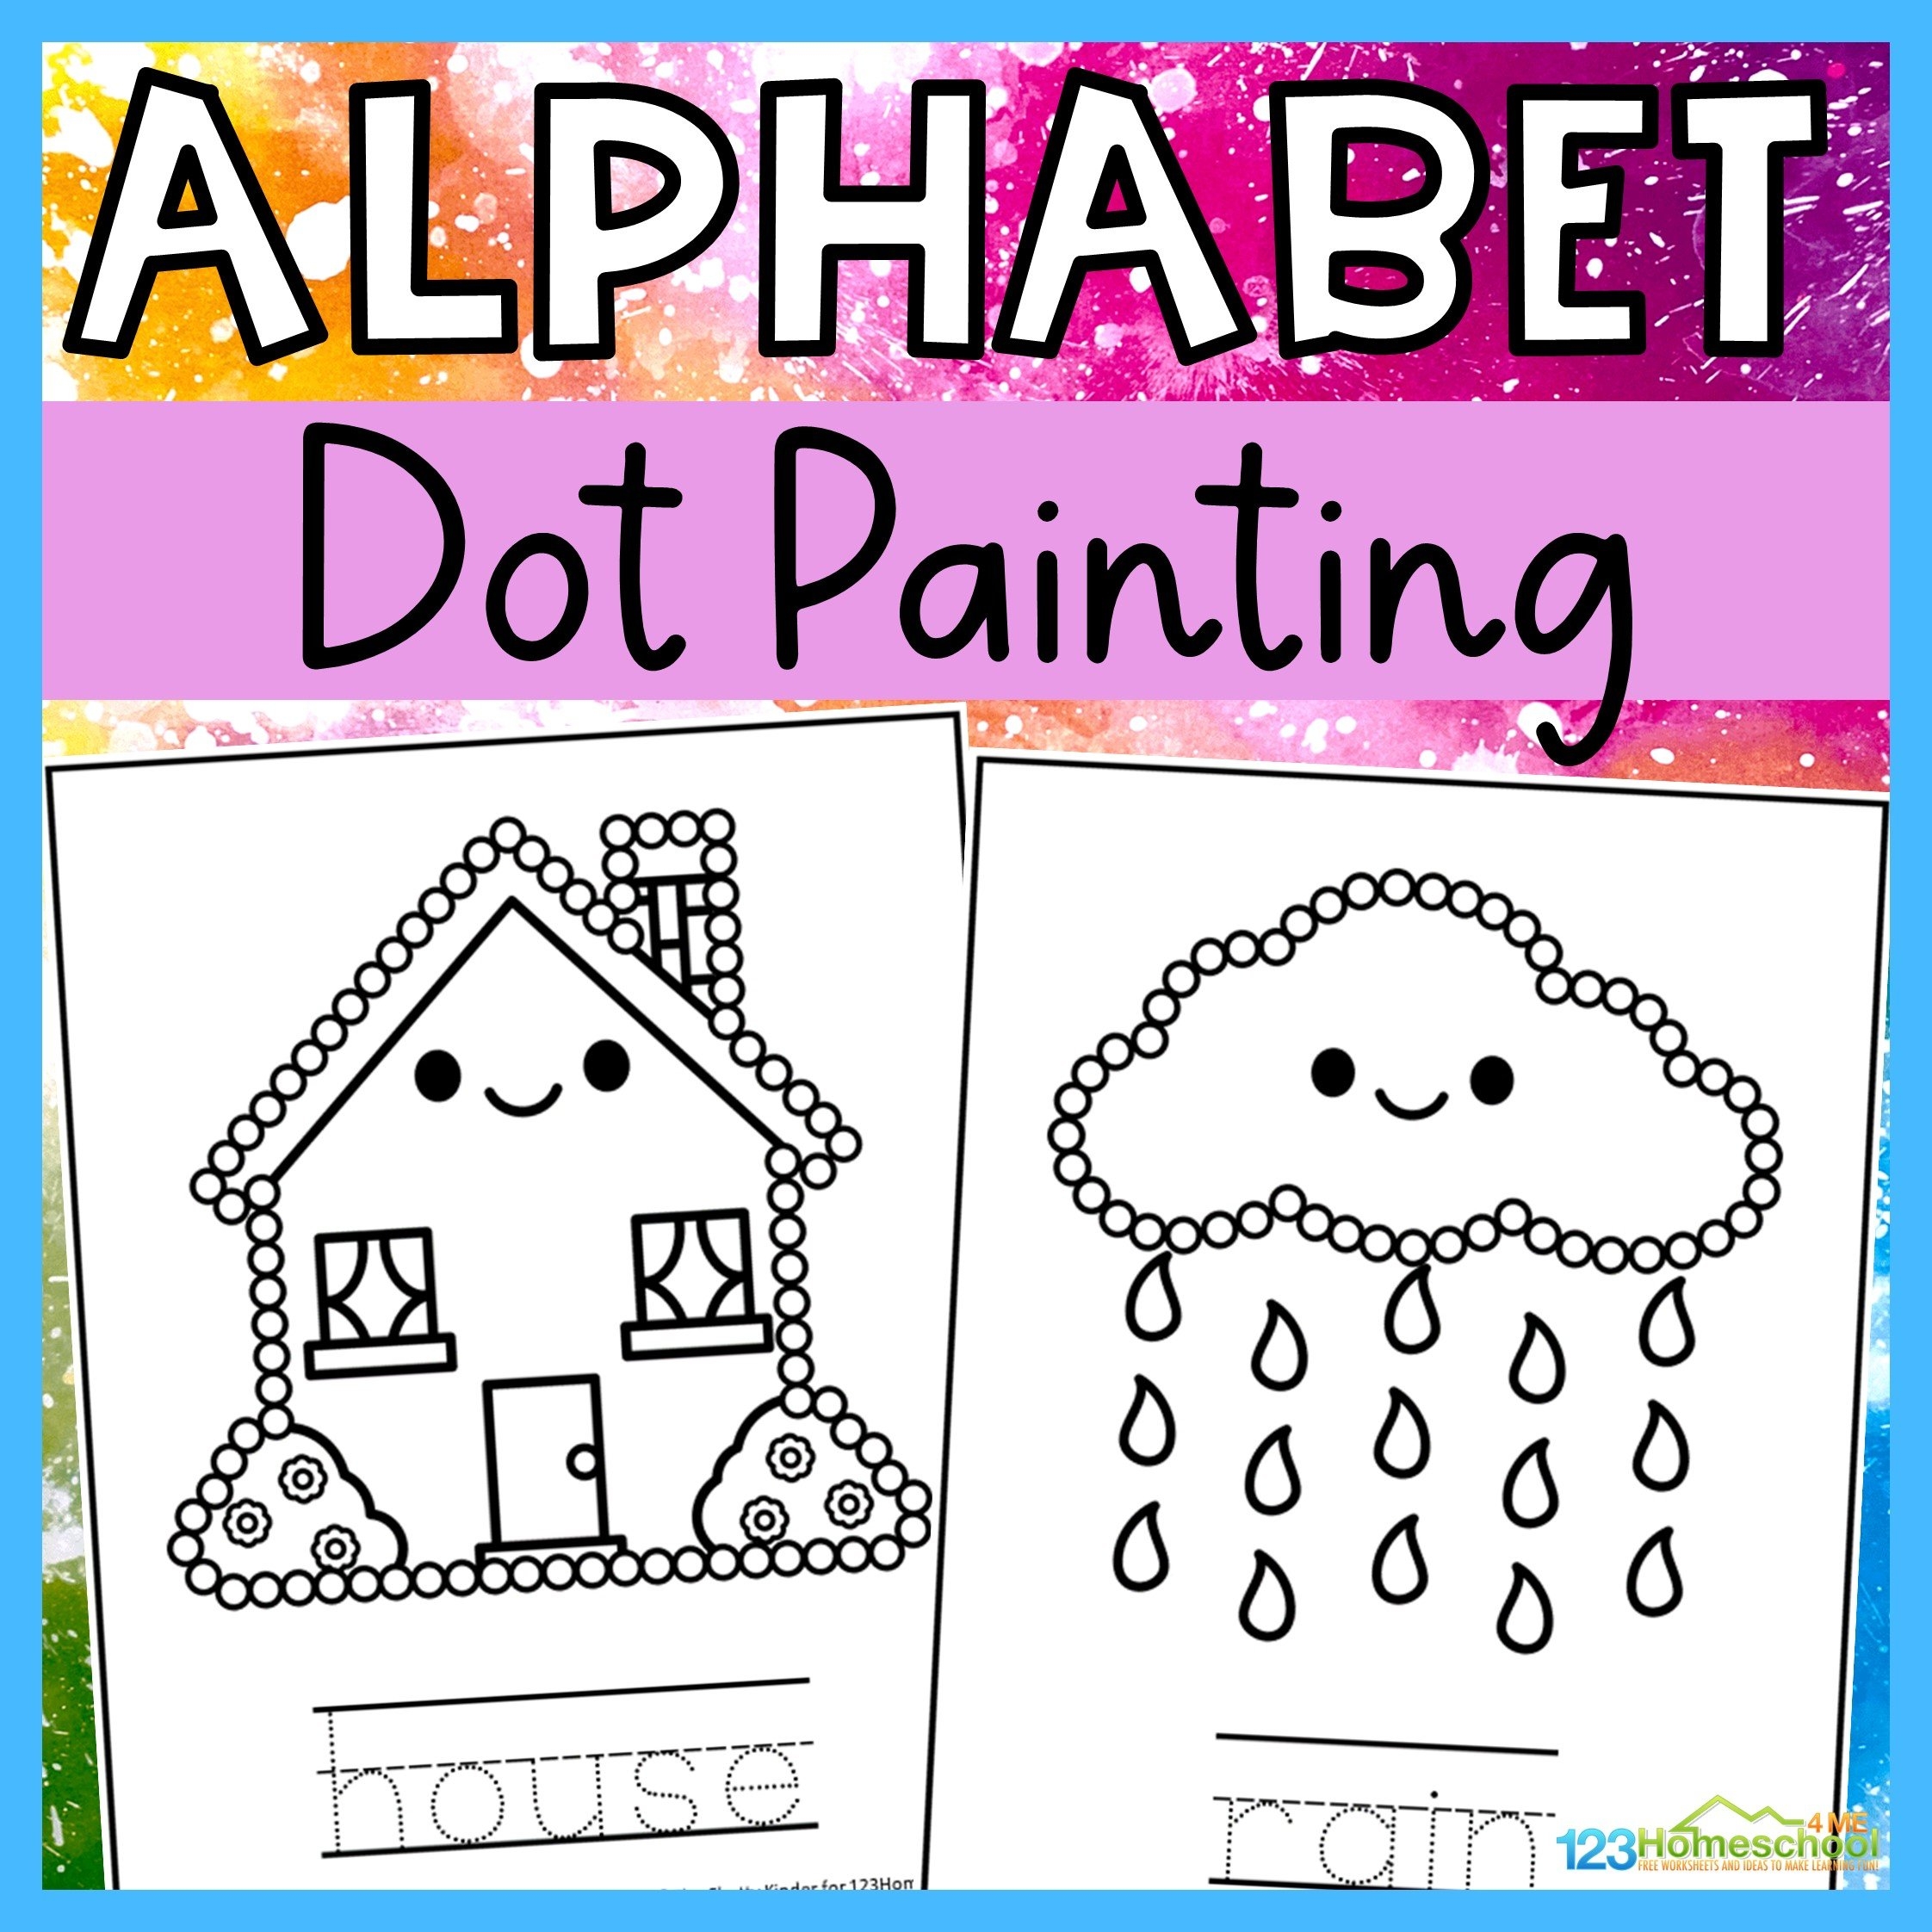 Alphabet Q Tip Painting With FREE Dot Painting Printable Template